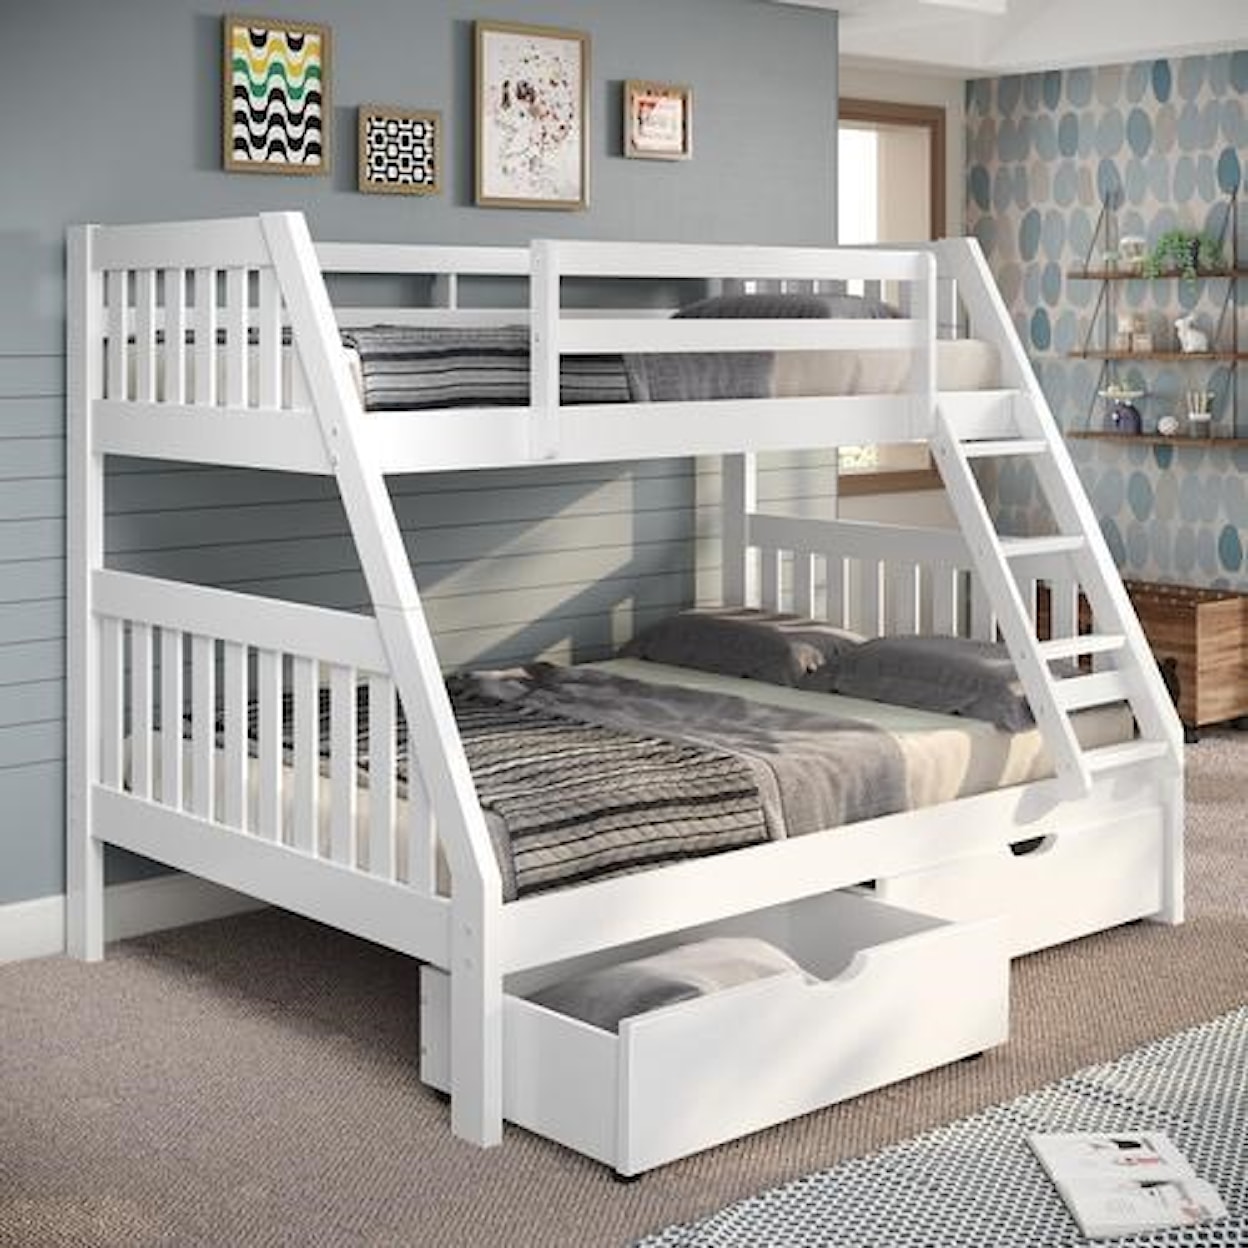 Canal House Bunk Beds Twin-Over-Full Bunk Bed White with Drawers